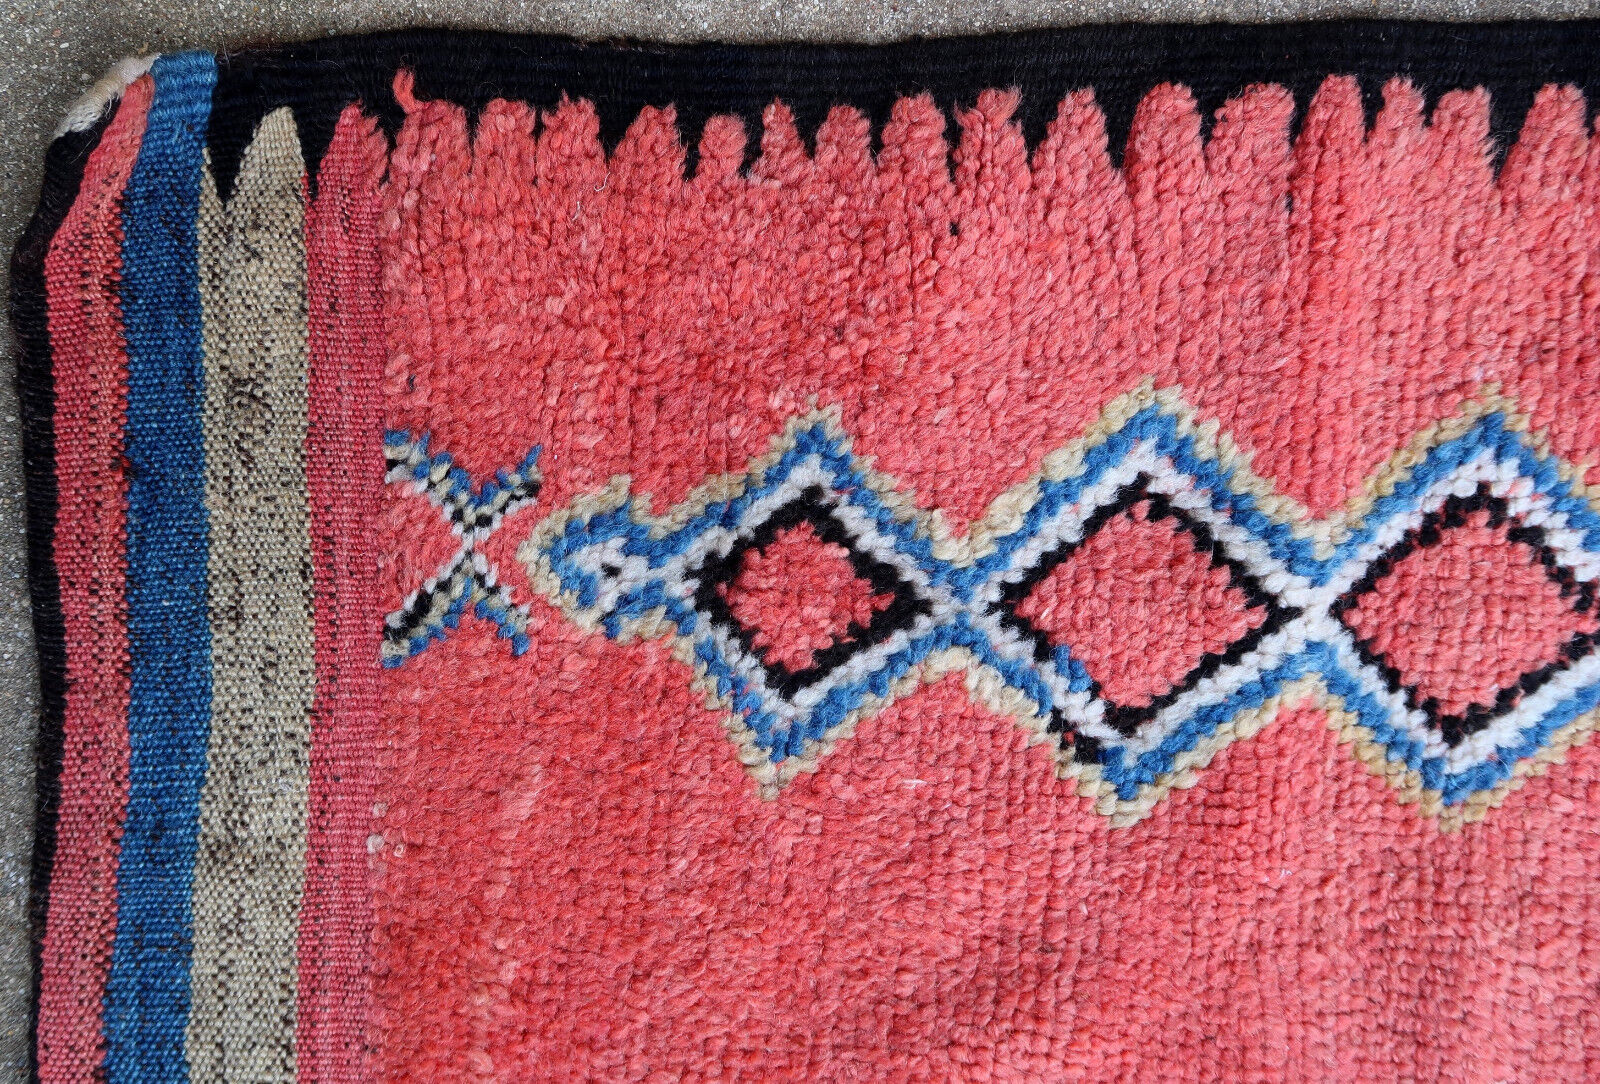 Handmade vintage rug from Morocco in Berber style and raspberry color. The rug is from the beginning of 20th century made by the Ouled Bou Sbaa tribe in the region of Chichaoua in Morocco. It is in original good condition.